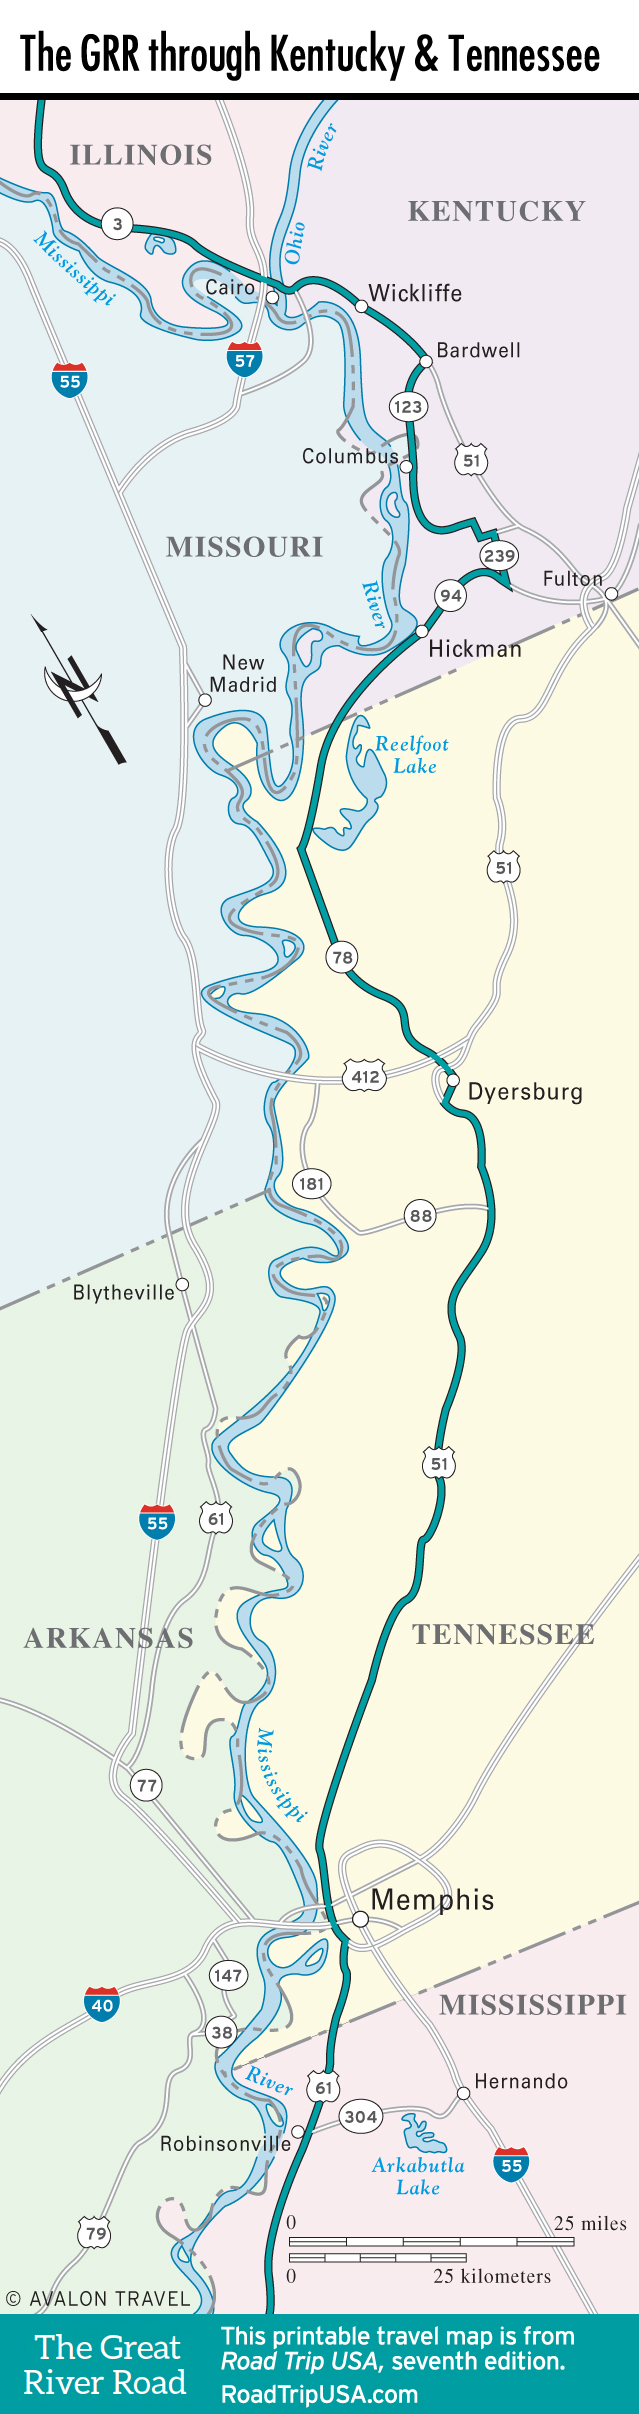 Great River Road - Map